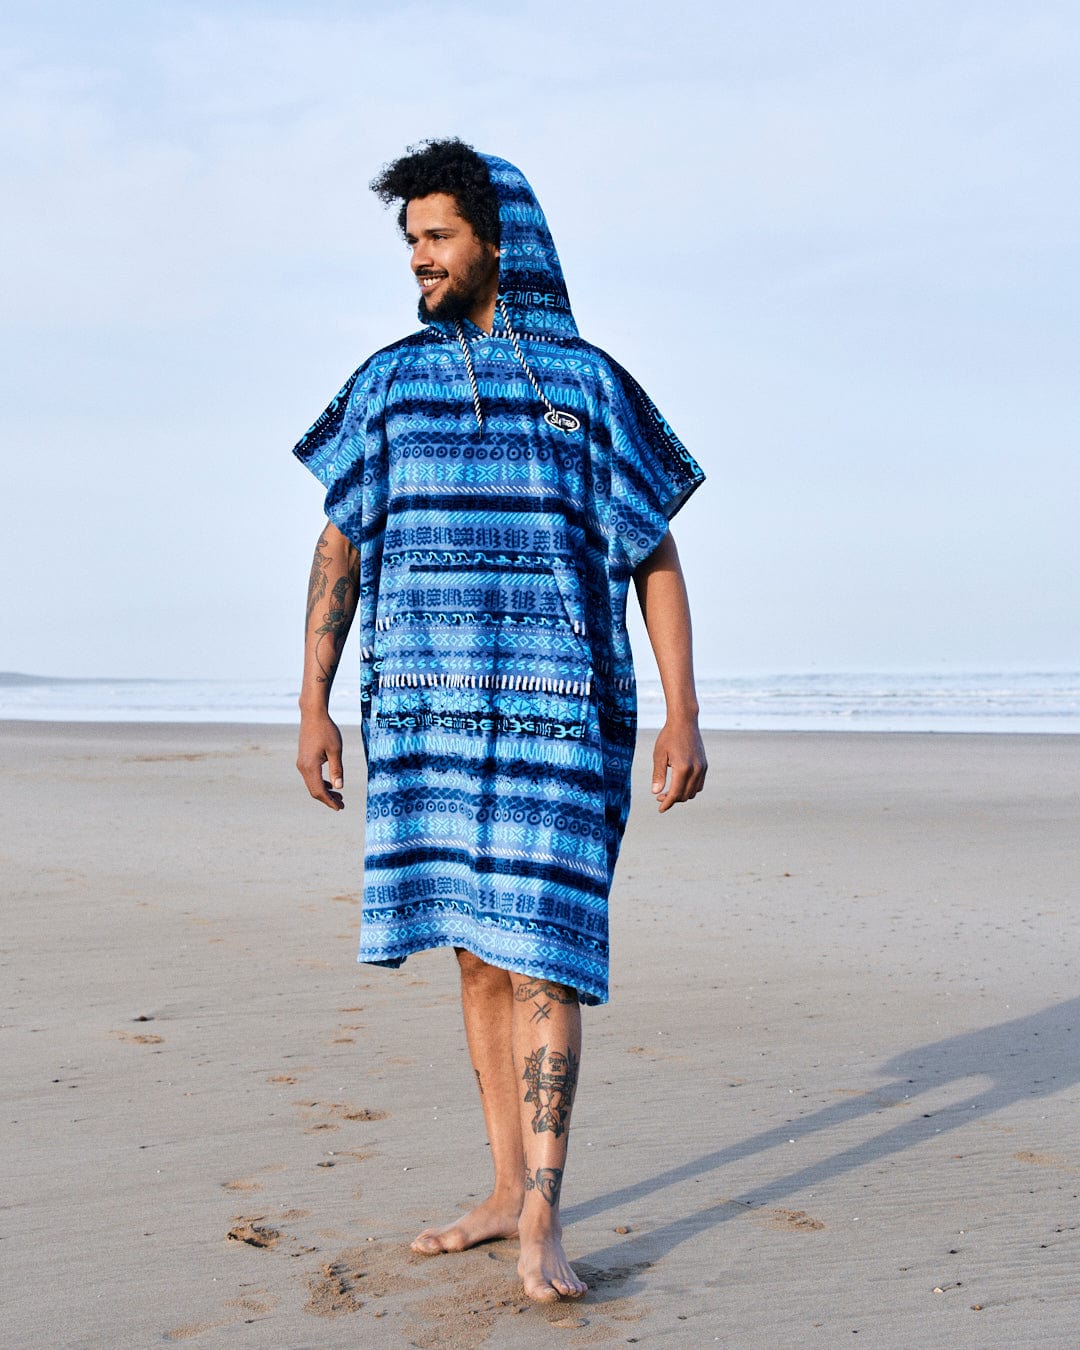 A man in a Saltrock blue vintage stripe pattern Marks - Changing Towel poncho standing barefoot on a sandy beach, looking to the side with a slight smile.